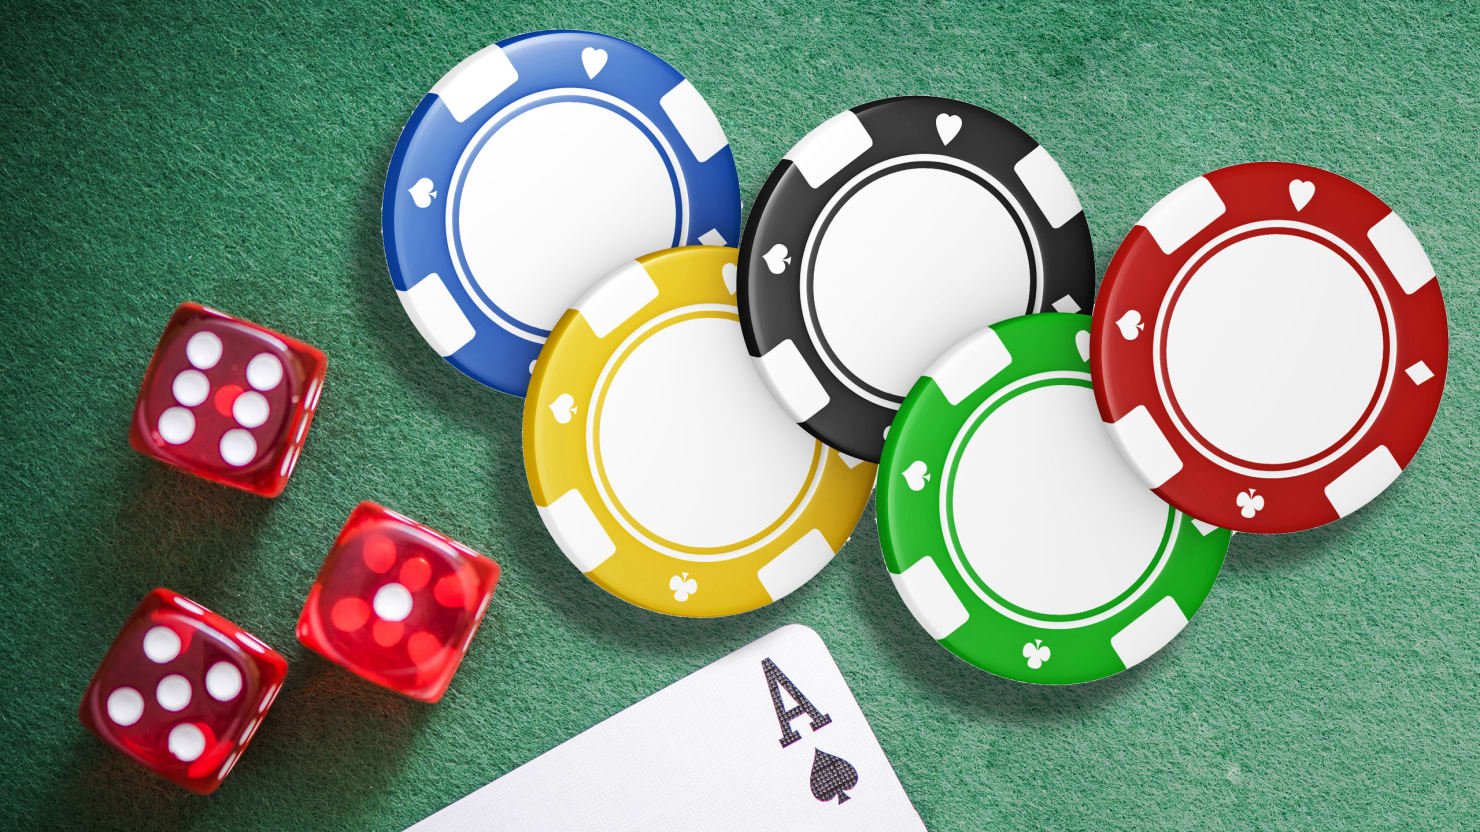 PokerStars: Play Private Poker Games With These Easy Steps